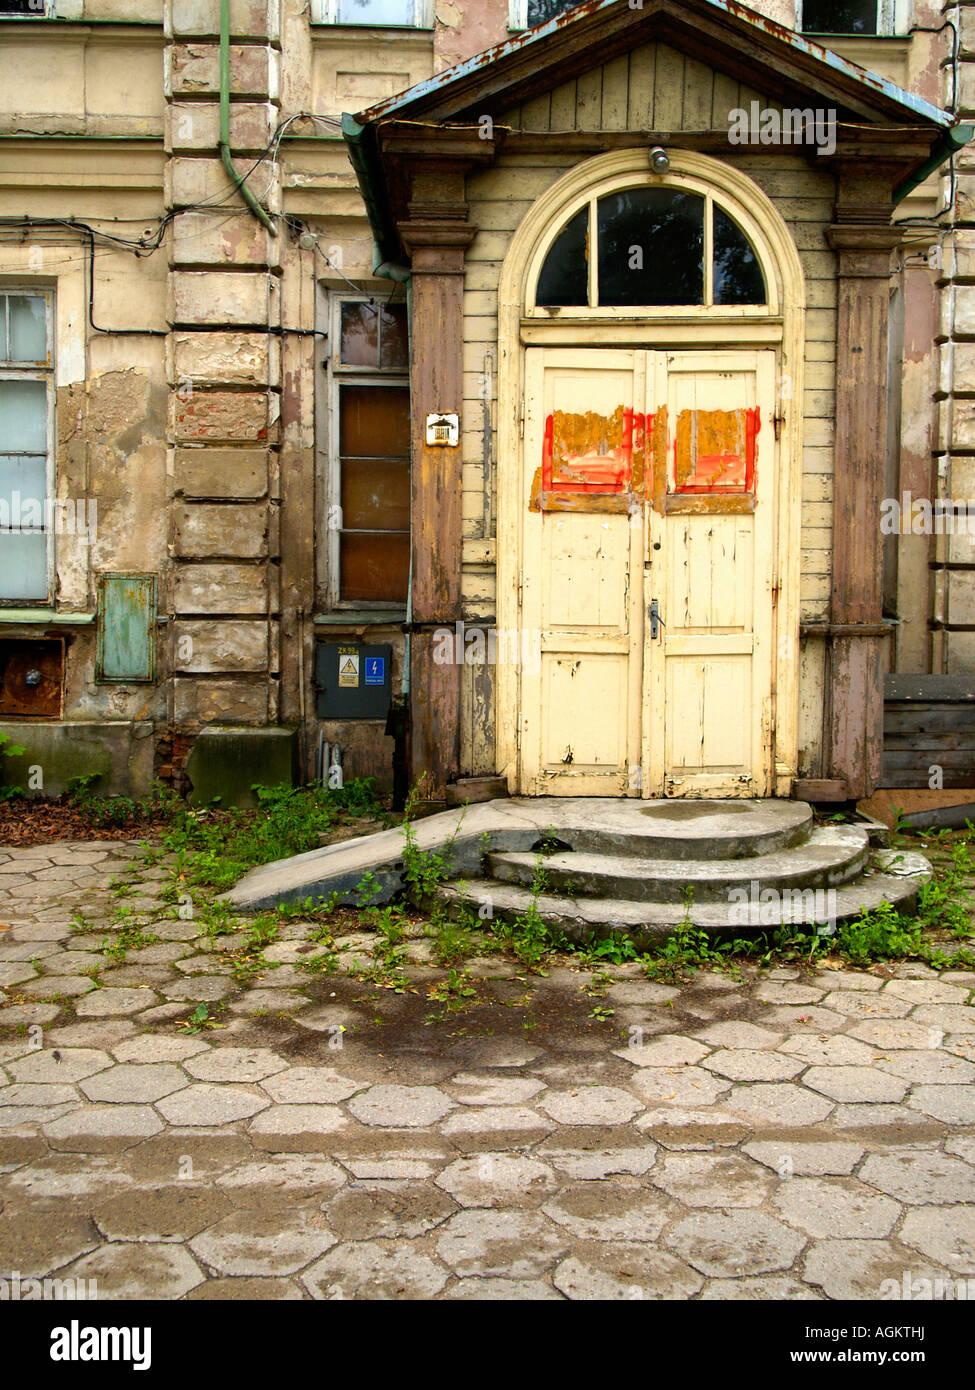 Entrance to an abandoned masonry hospital building in Suwalki, Poland, with stone courtyard and arched doorway. Stock Photo